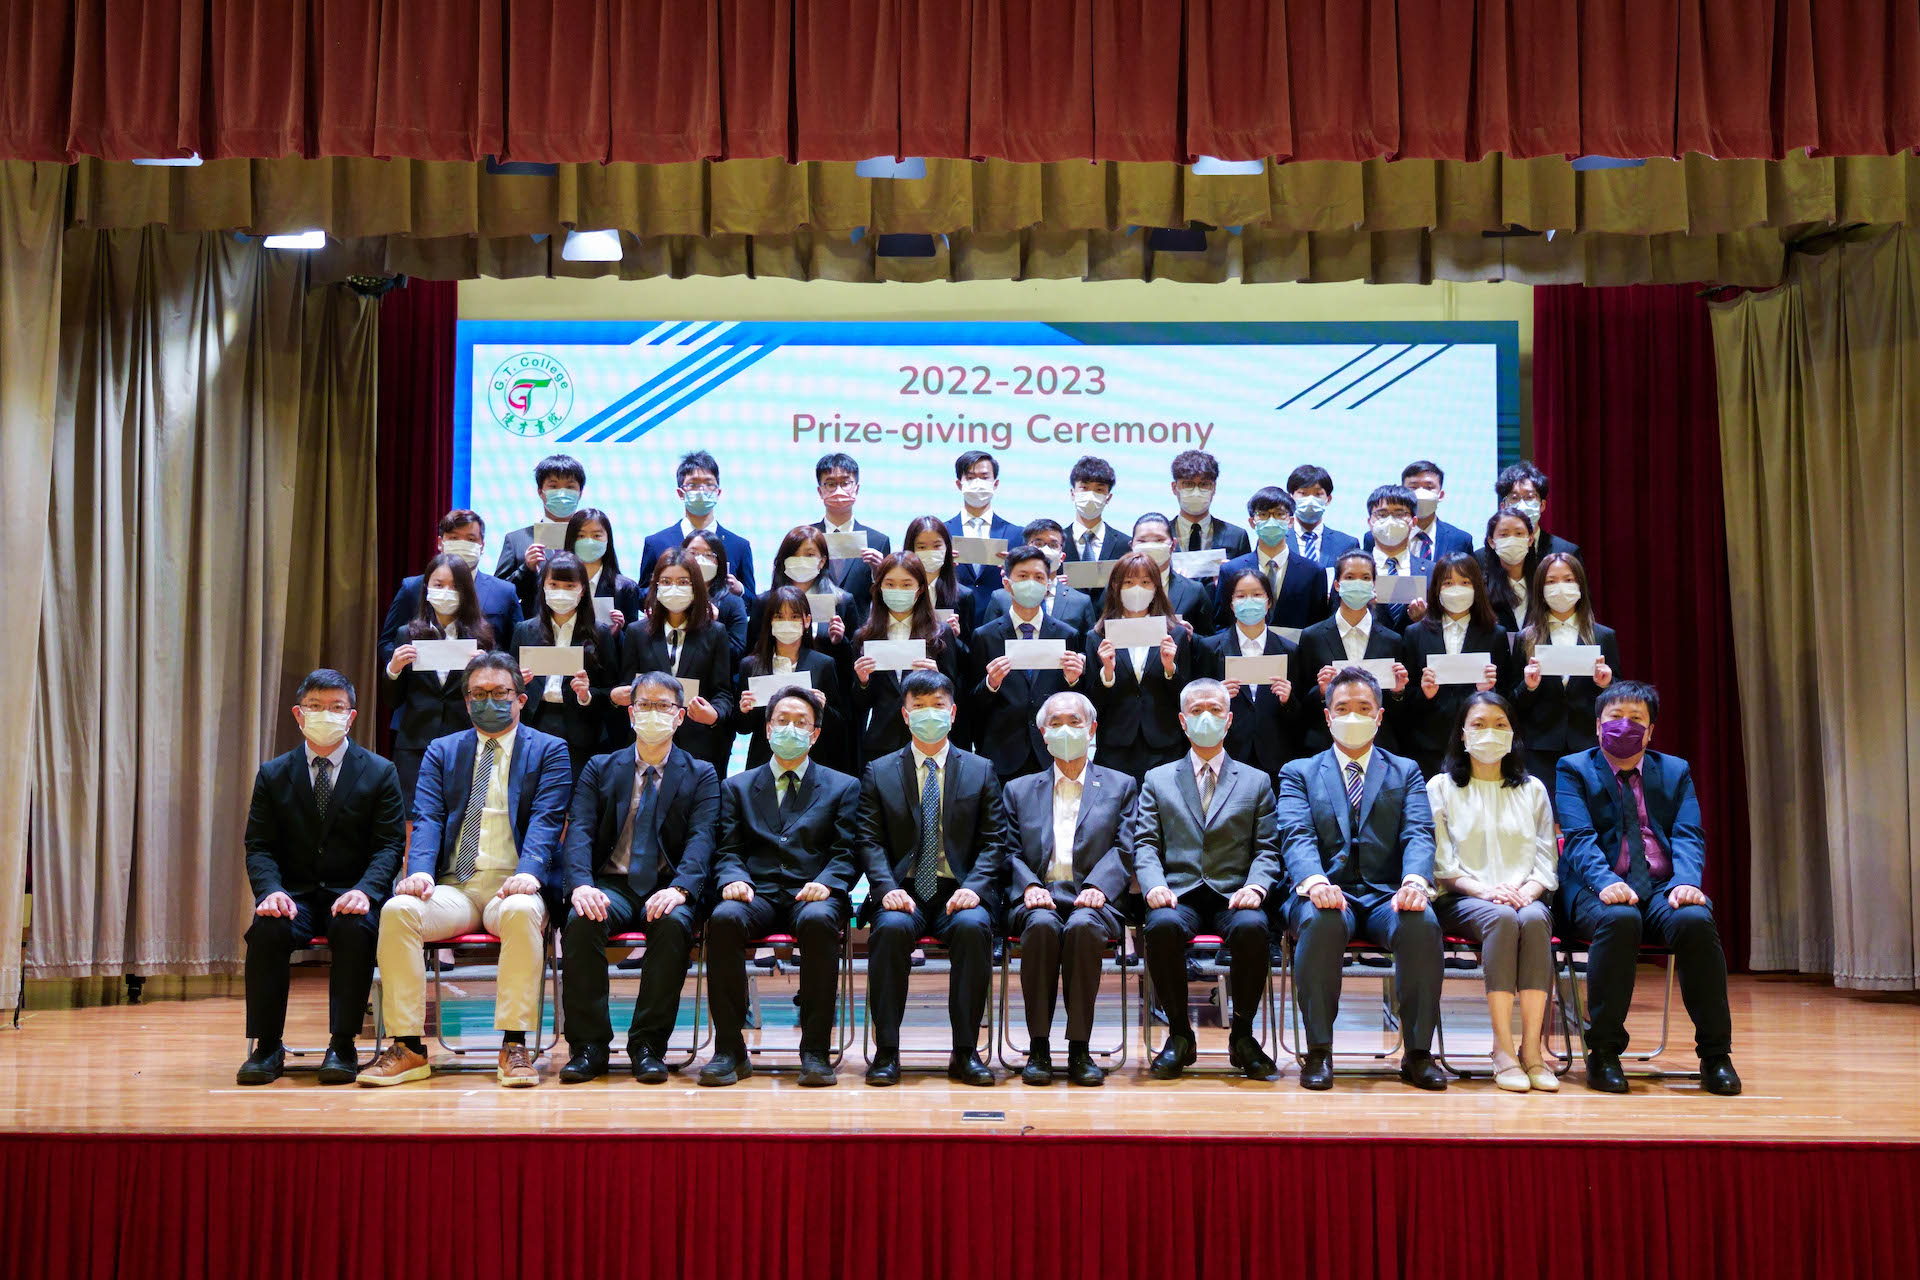 2022/2023 Prize-Giving Ceremony